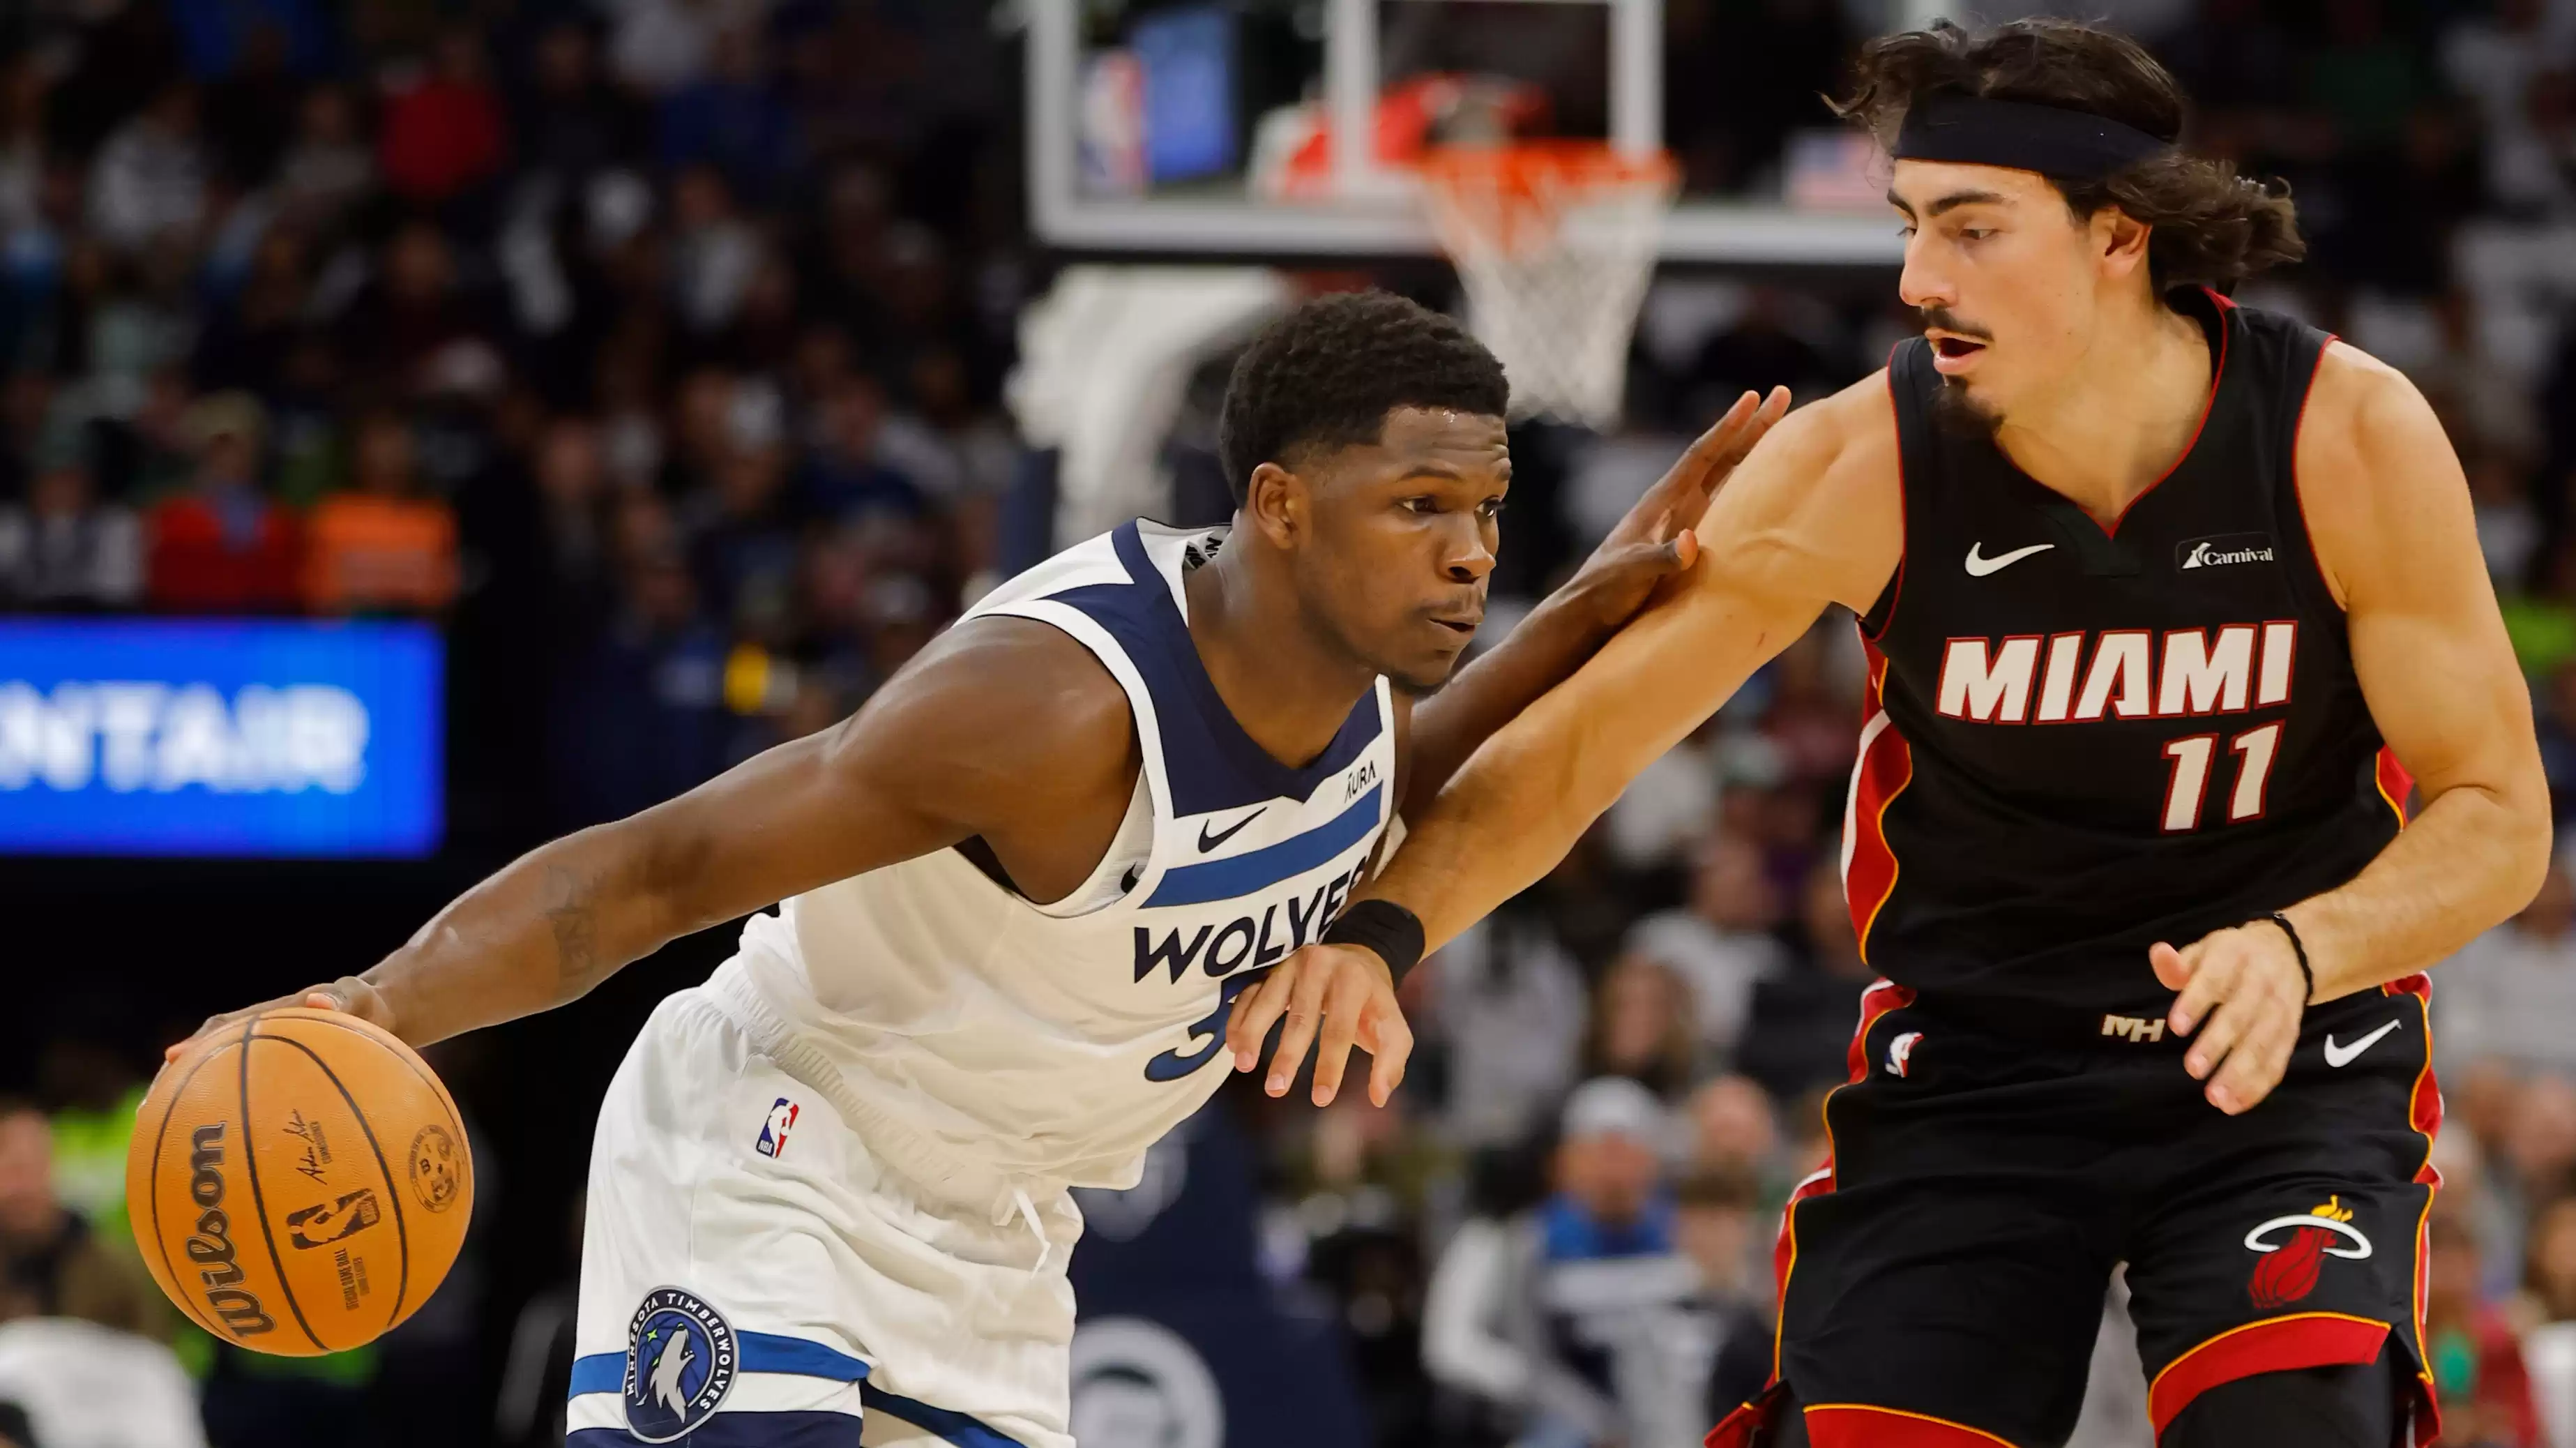 Naz Reid leads Minnesota Timberwolves in dominant home opener victory against short-handed Miami Heat